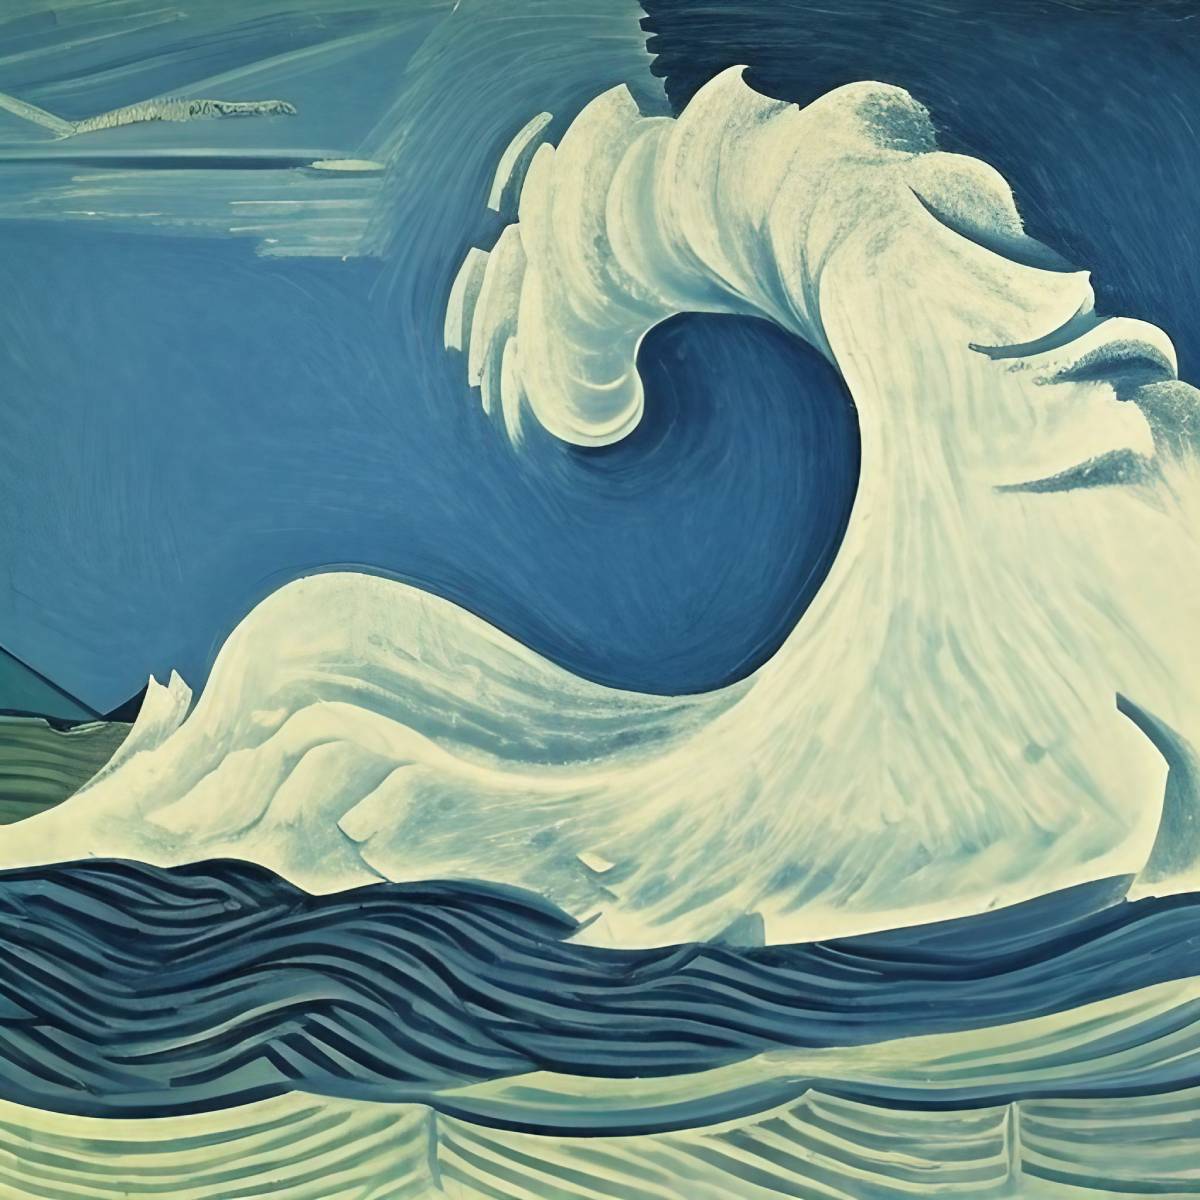 Painting of a giant wave. (Credit: Odd Feed)